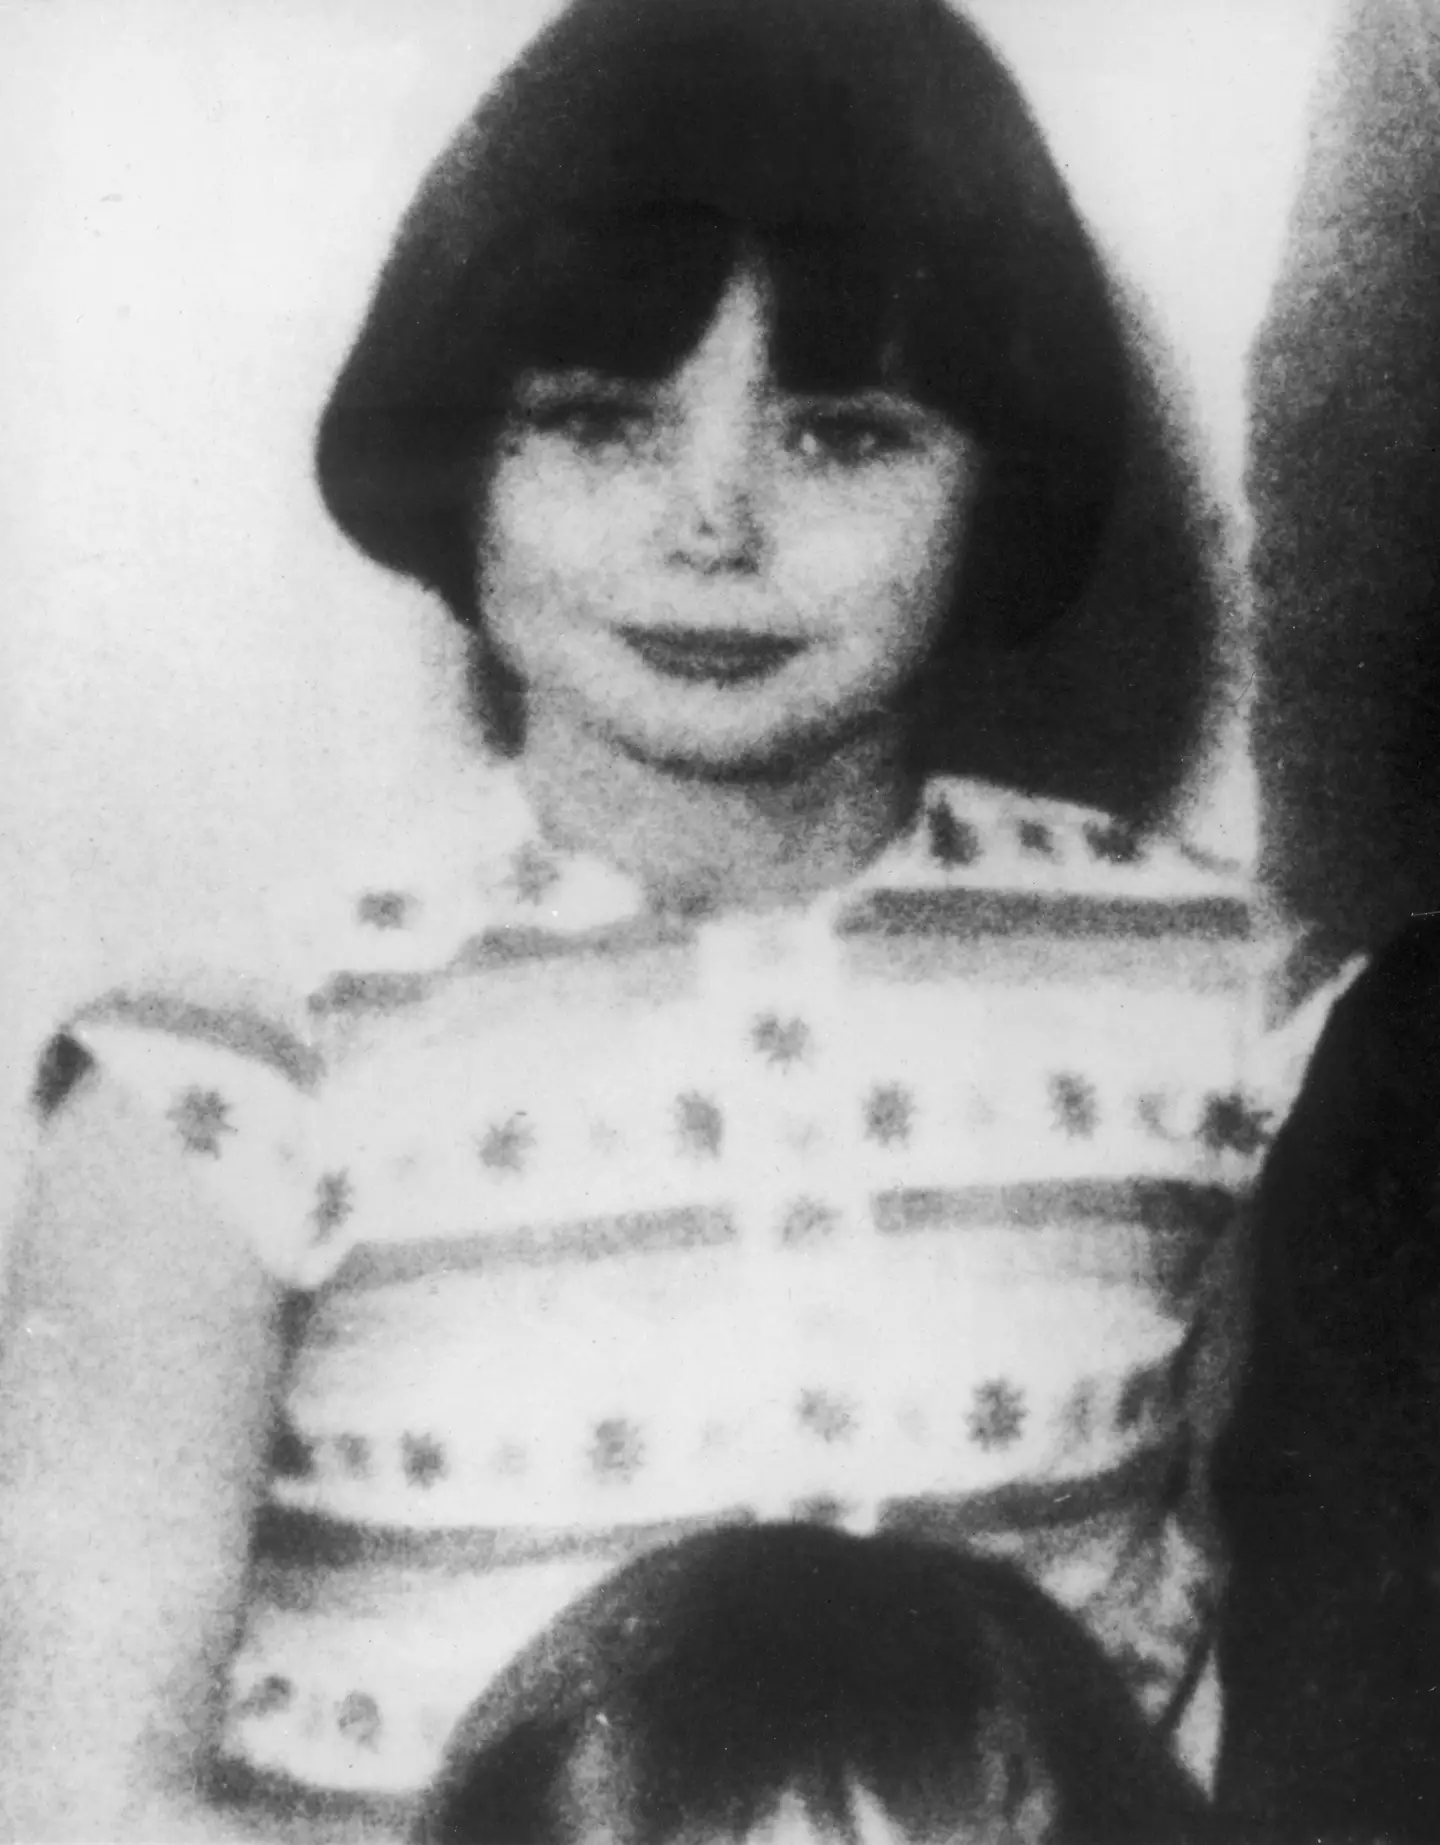 Mary Bell first killed someone when she was 10. (Keystone/Hulton Archive/Getty Images)